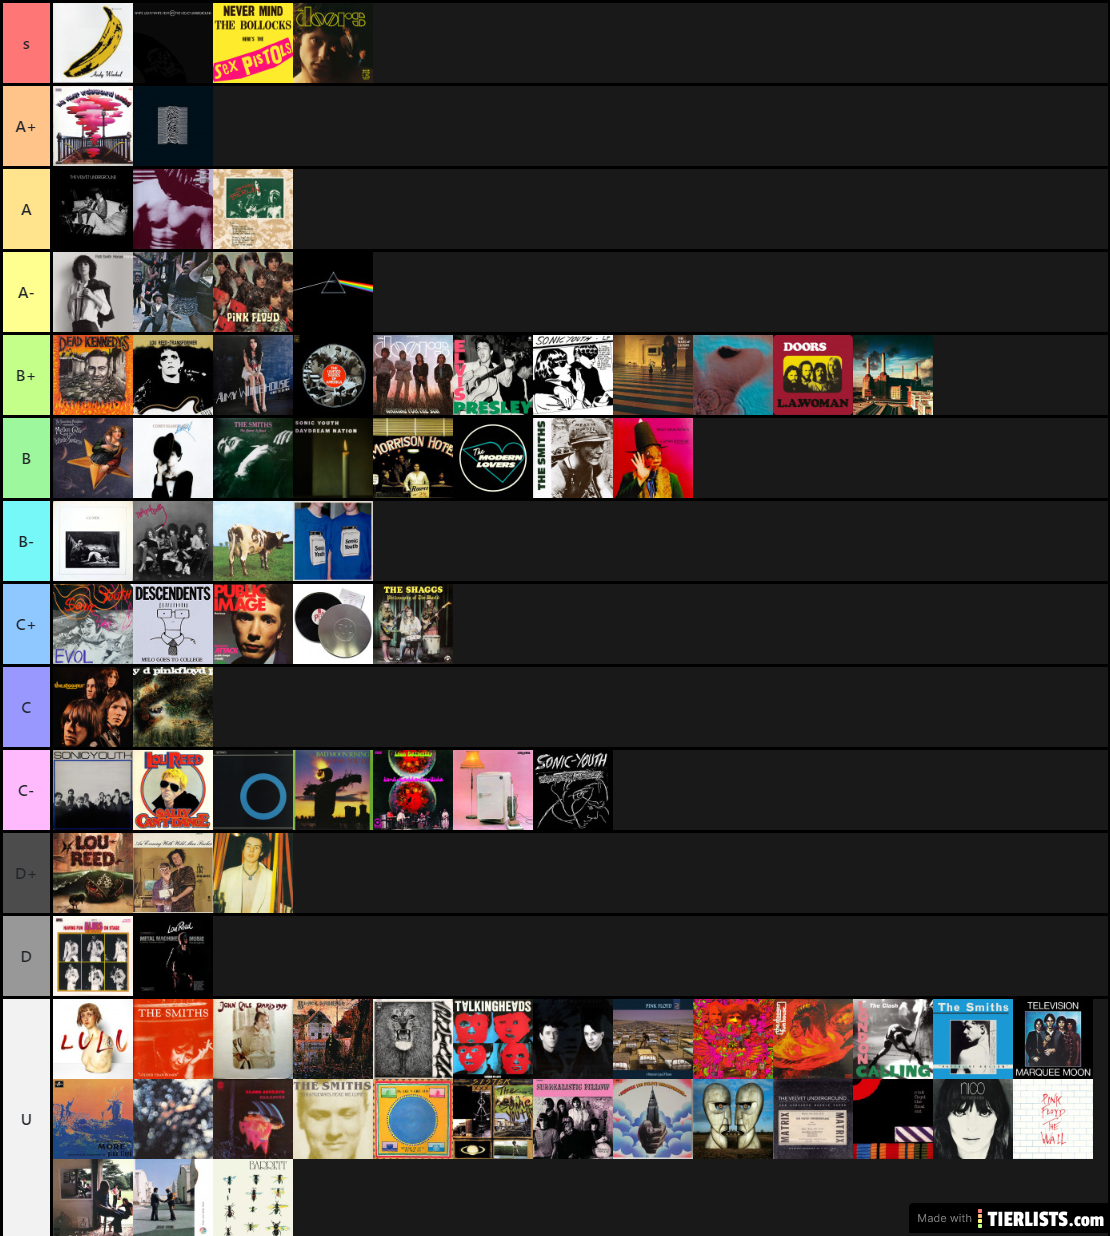 Ranking albums I've listened to